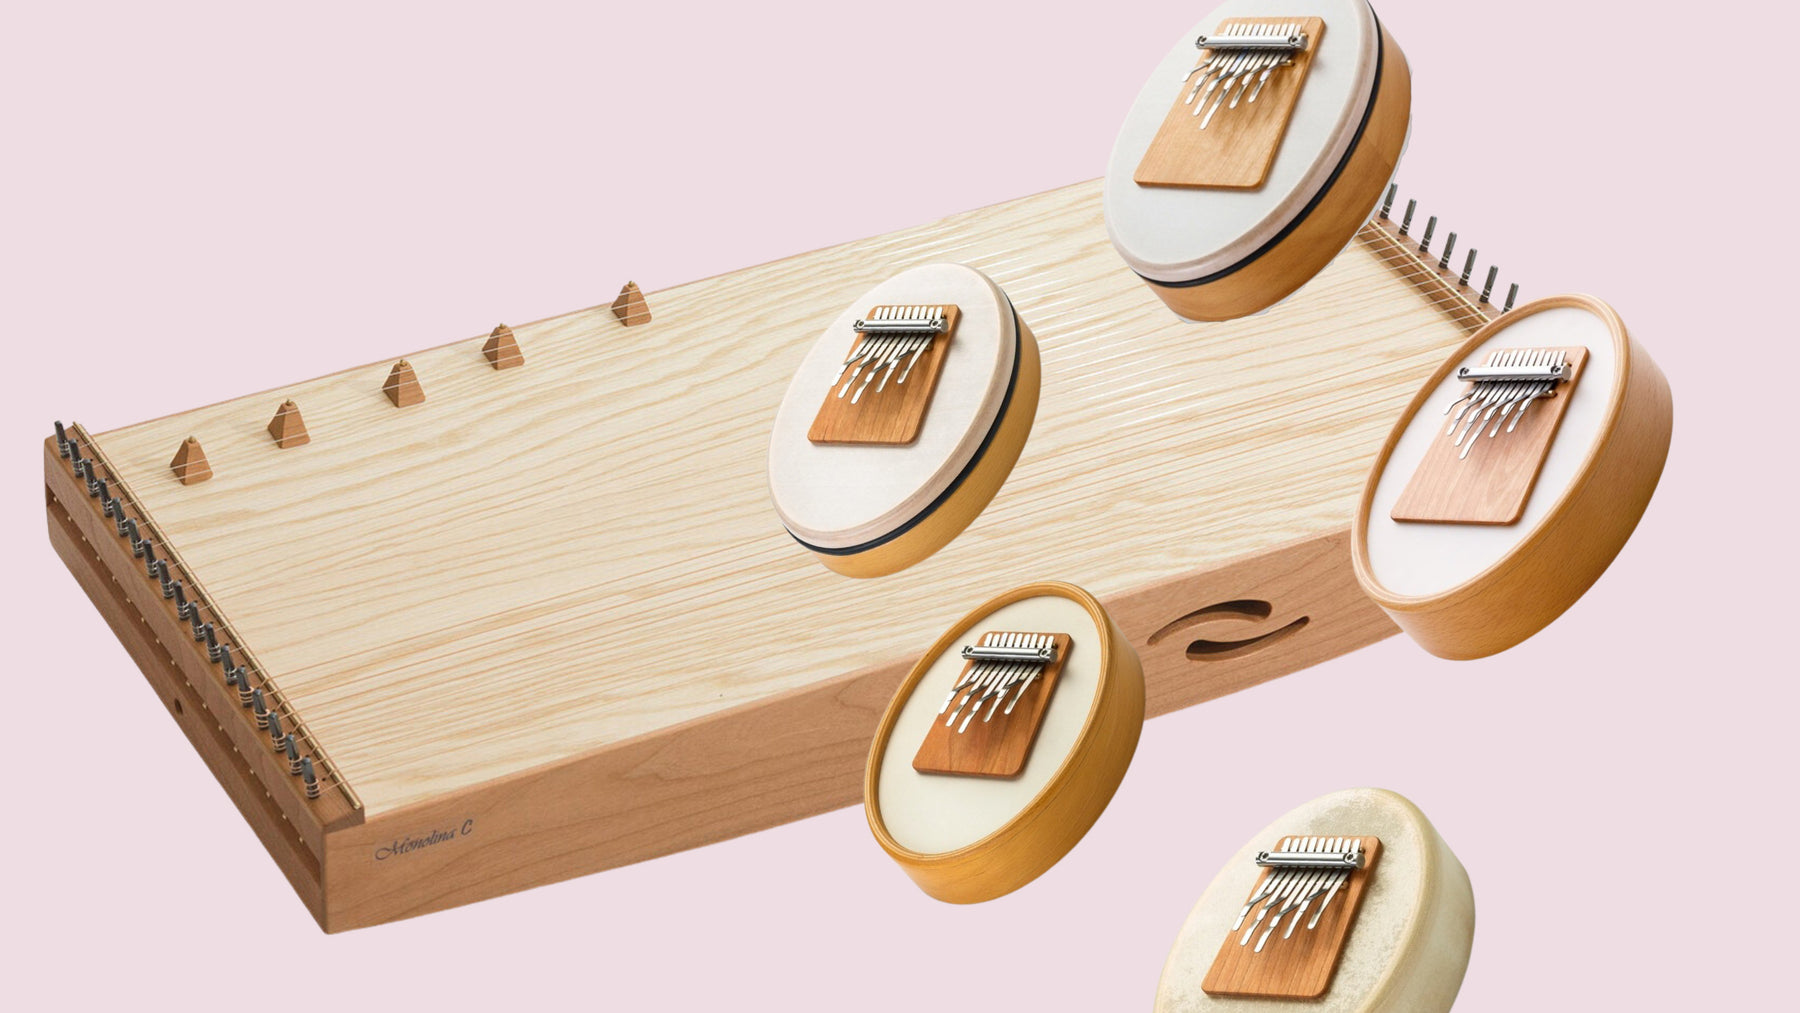 Can you play a Sansula ON a Monochord??